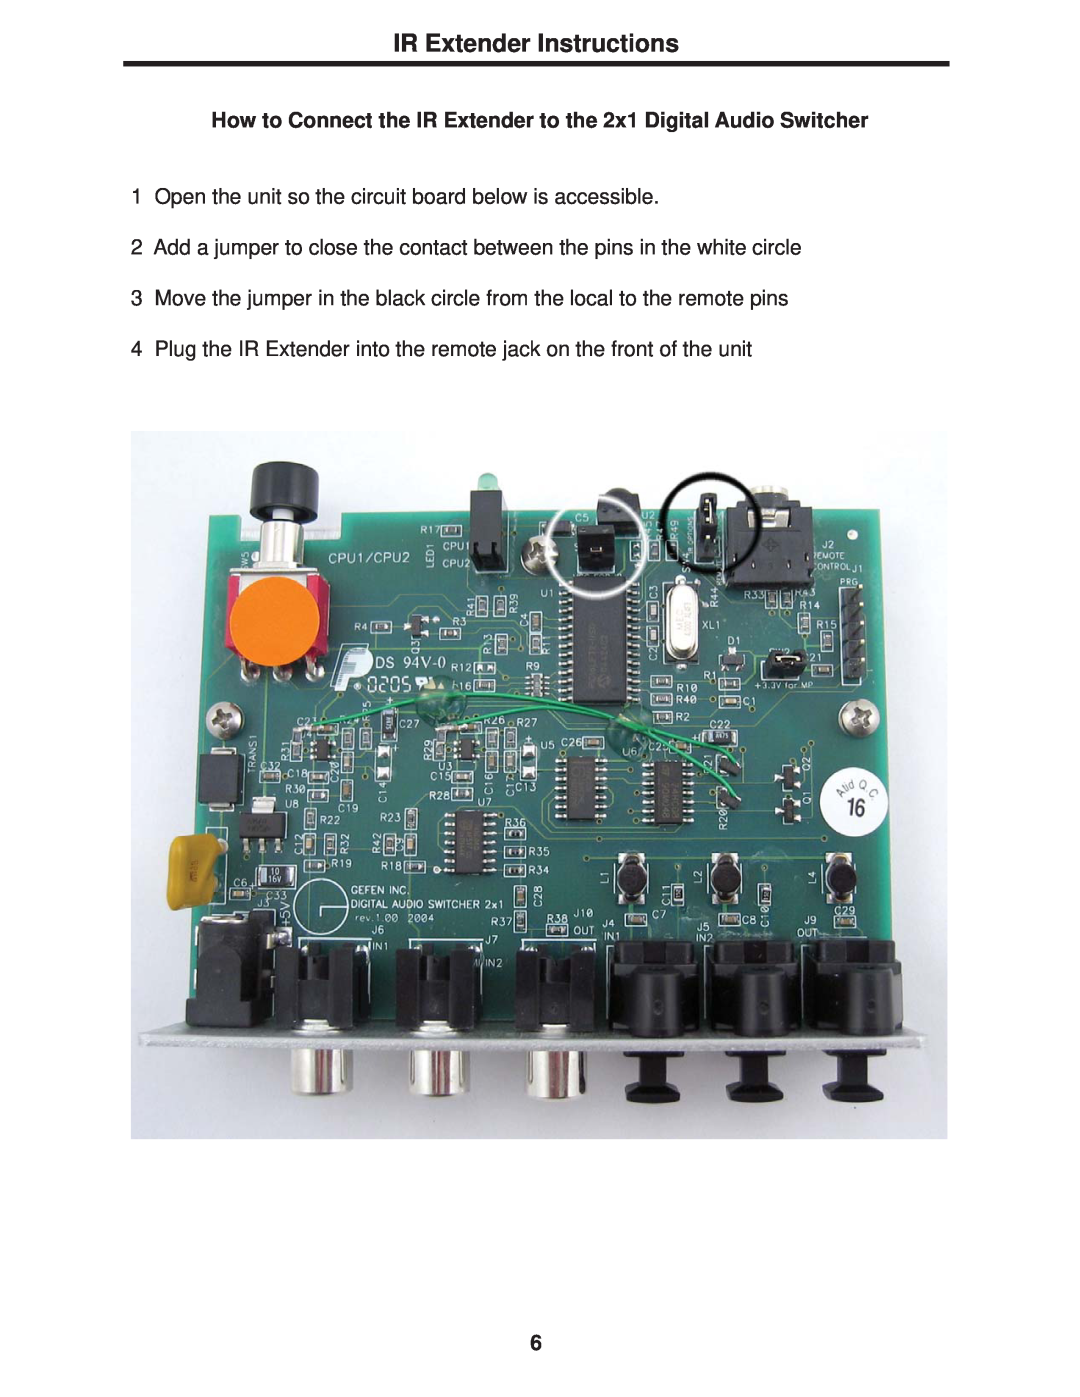 Gefen user manual IR Extender Instructions, How to Connect the IR Extender to the 2x1 Digital Audio Switcher 